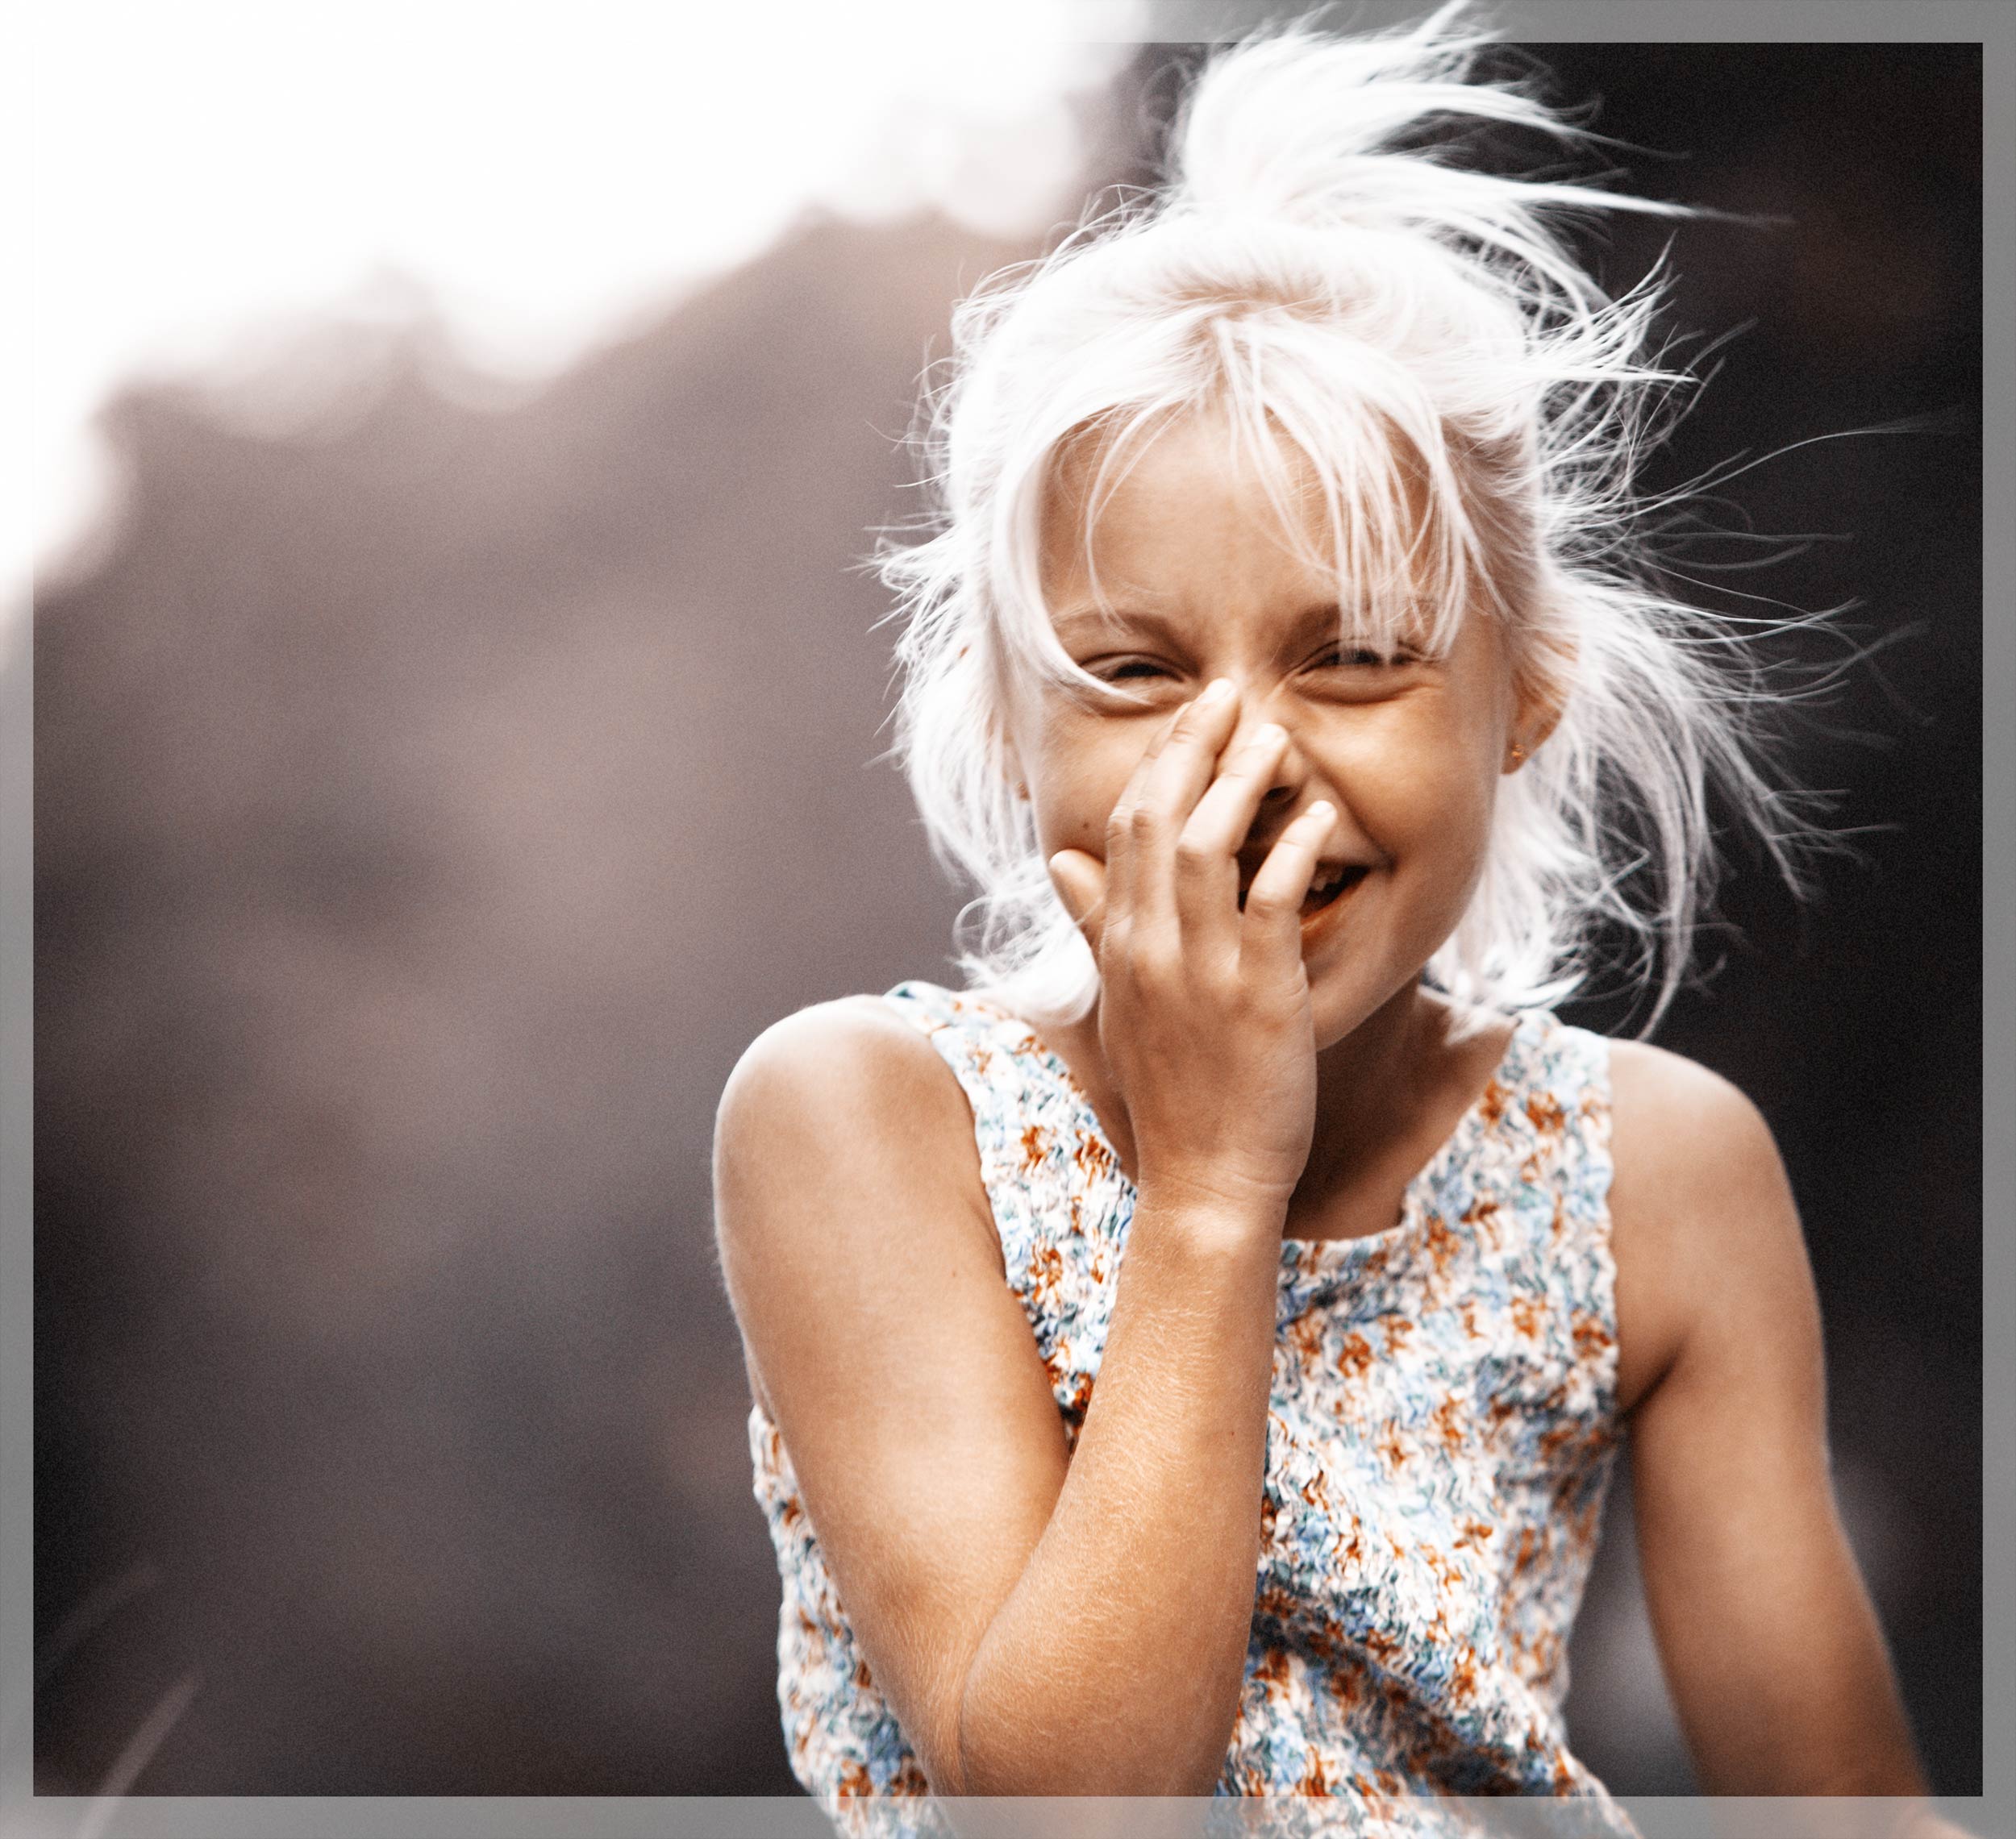 A young blonde girl laughing with the wind blowing her hair